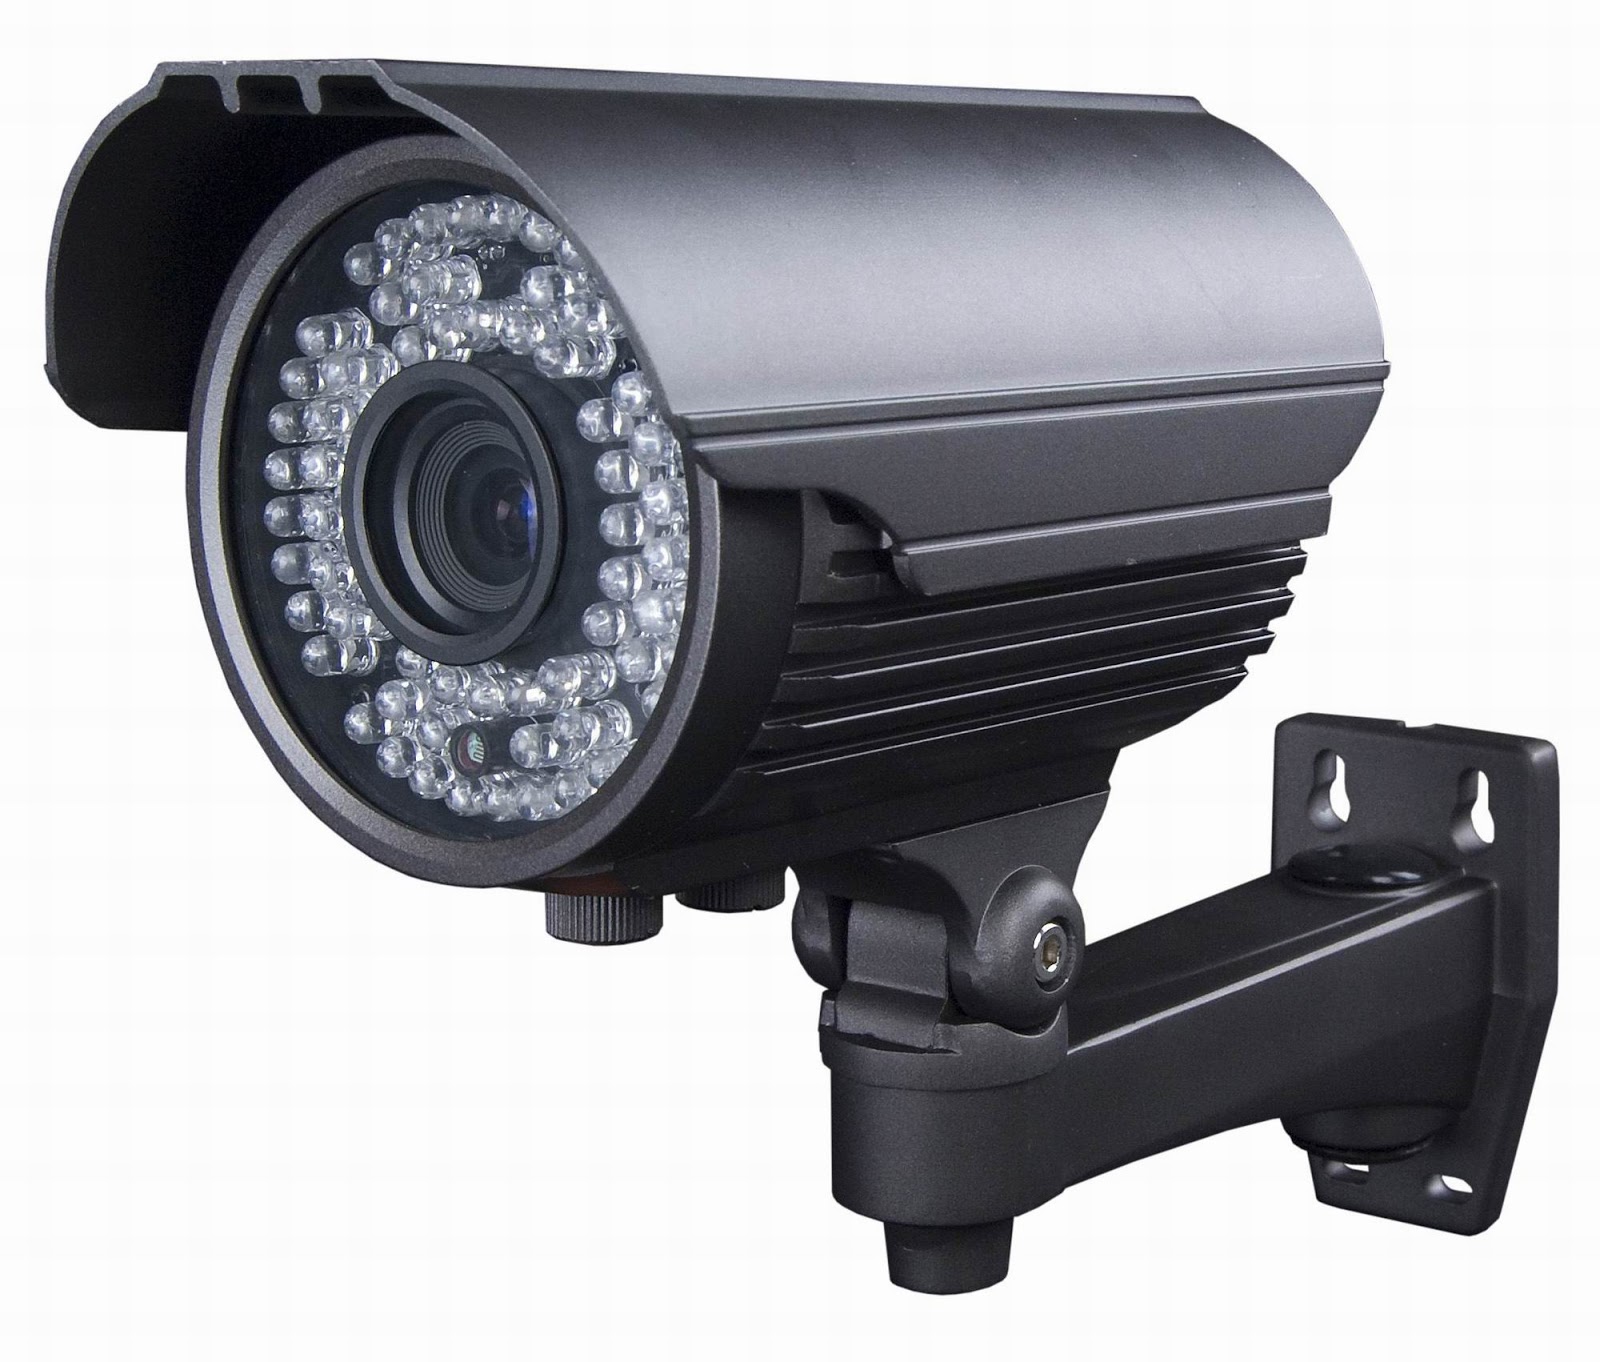 wireless-battery-operated-surveillance-cameras-for-home